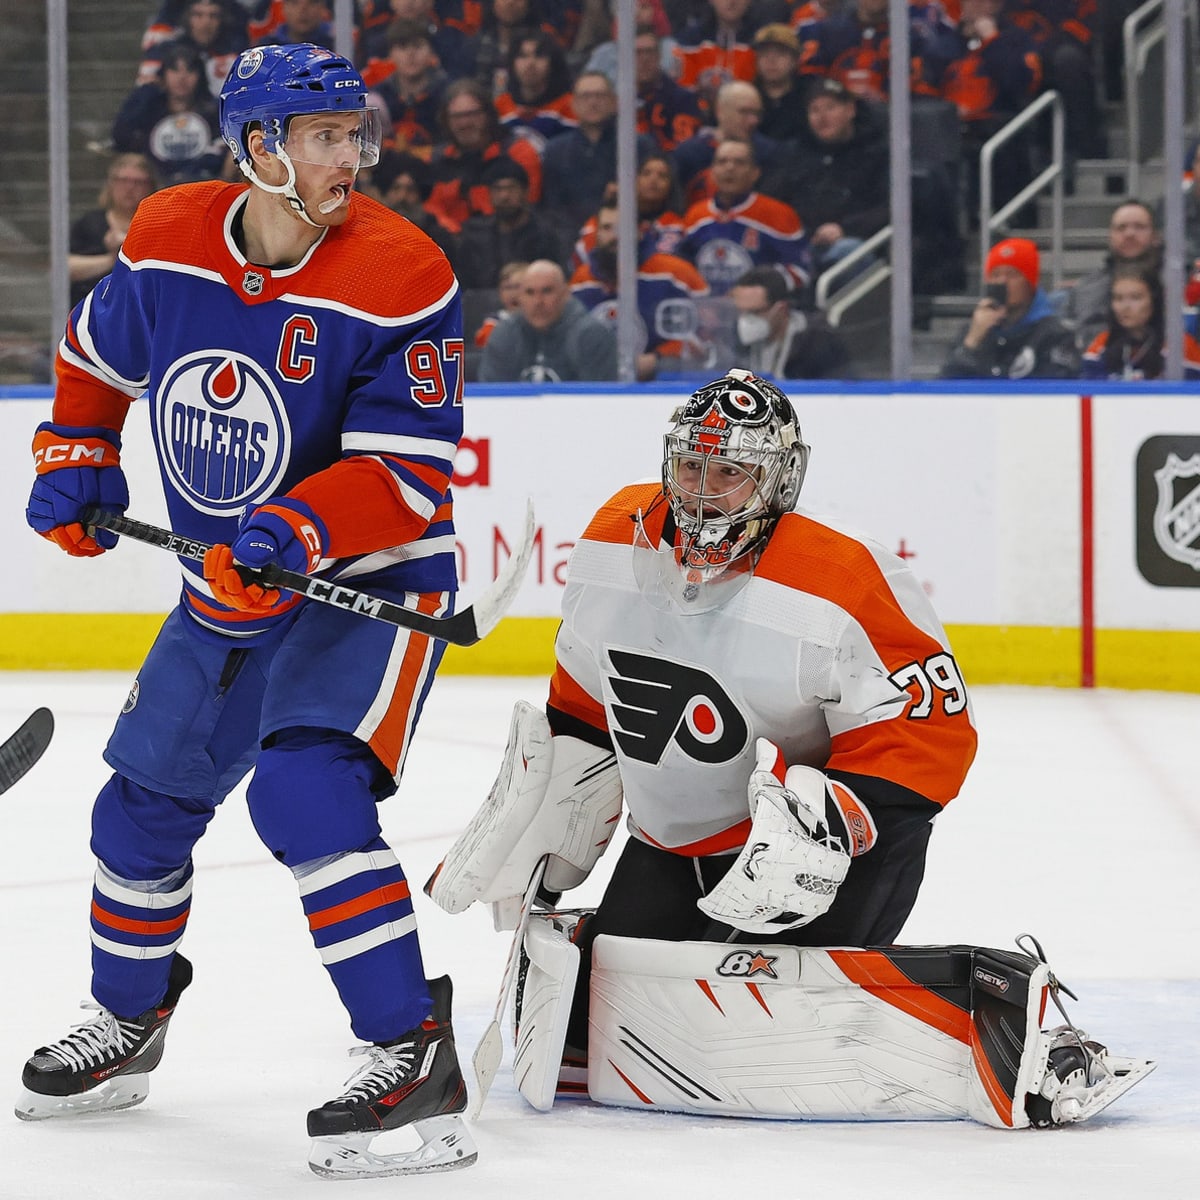 Game Preview: Flyers vs. Oilers